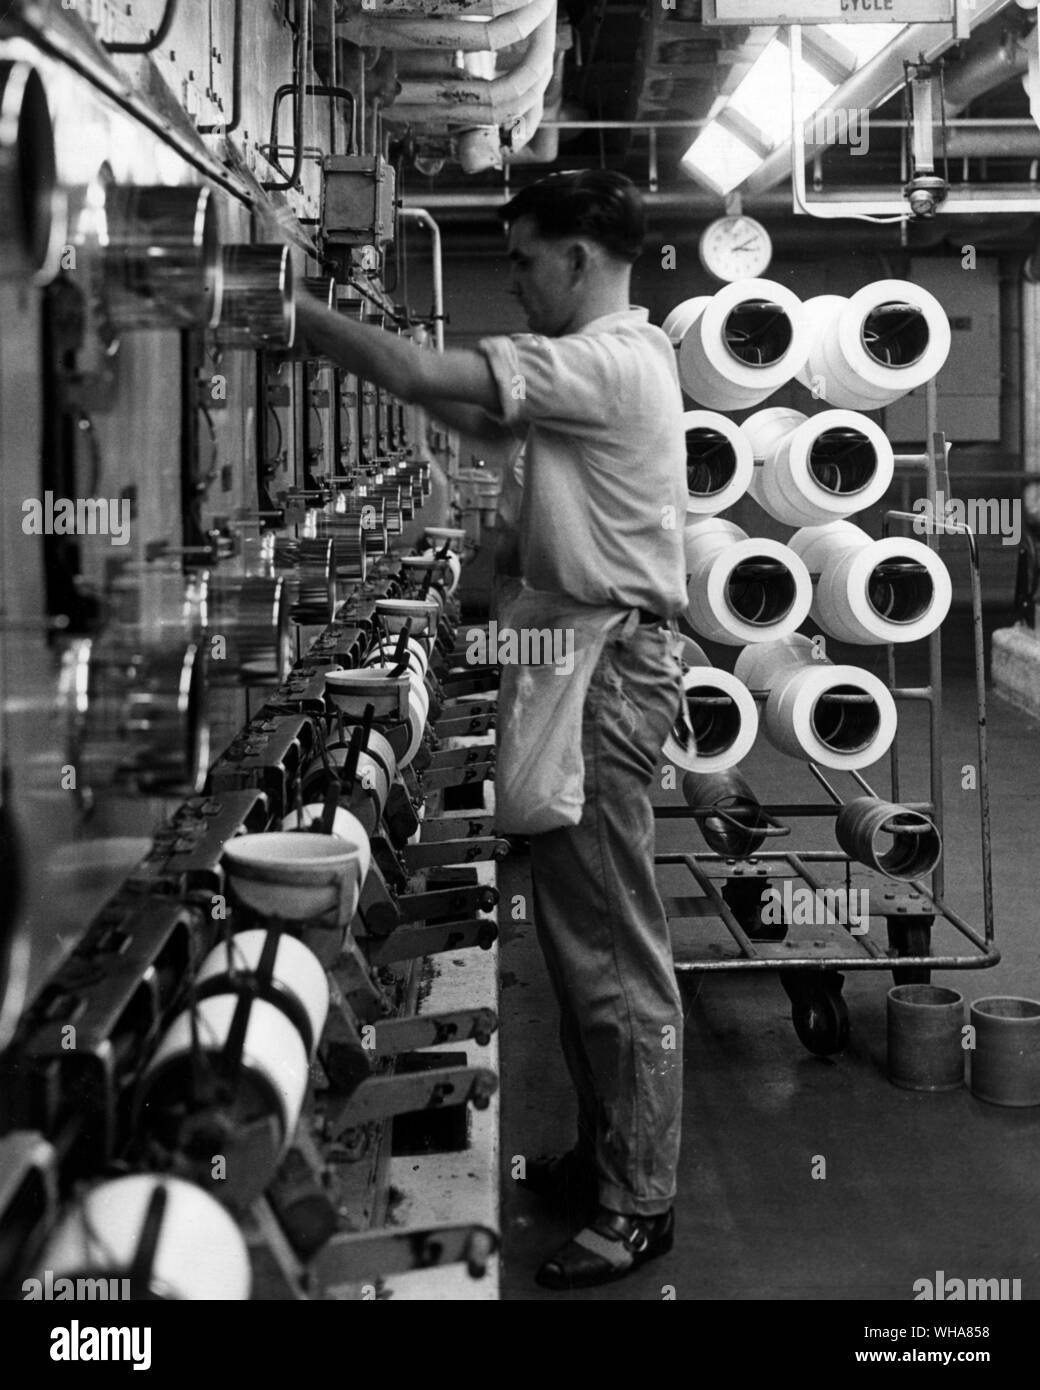 First stage in the production of nylon yarn involves melting the polymer and extruding it through spinnerets. Currents of air cool and solidify the extruded polymer which is then wound onto cylinders ready for cold drawing and subsequent processing. Here some of the spinning units in the main plant at the BNS headquarters at Pontypool Monmouthshire. British Nylon Spinners Ltd Stock Photo